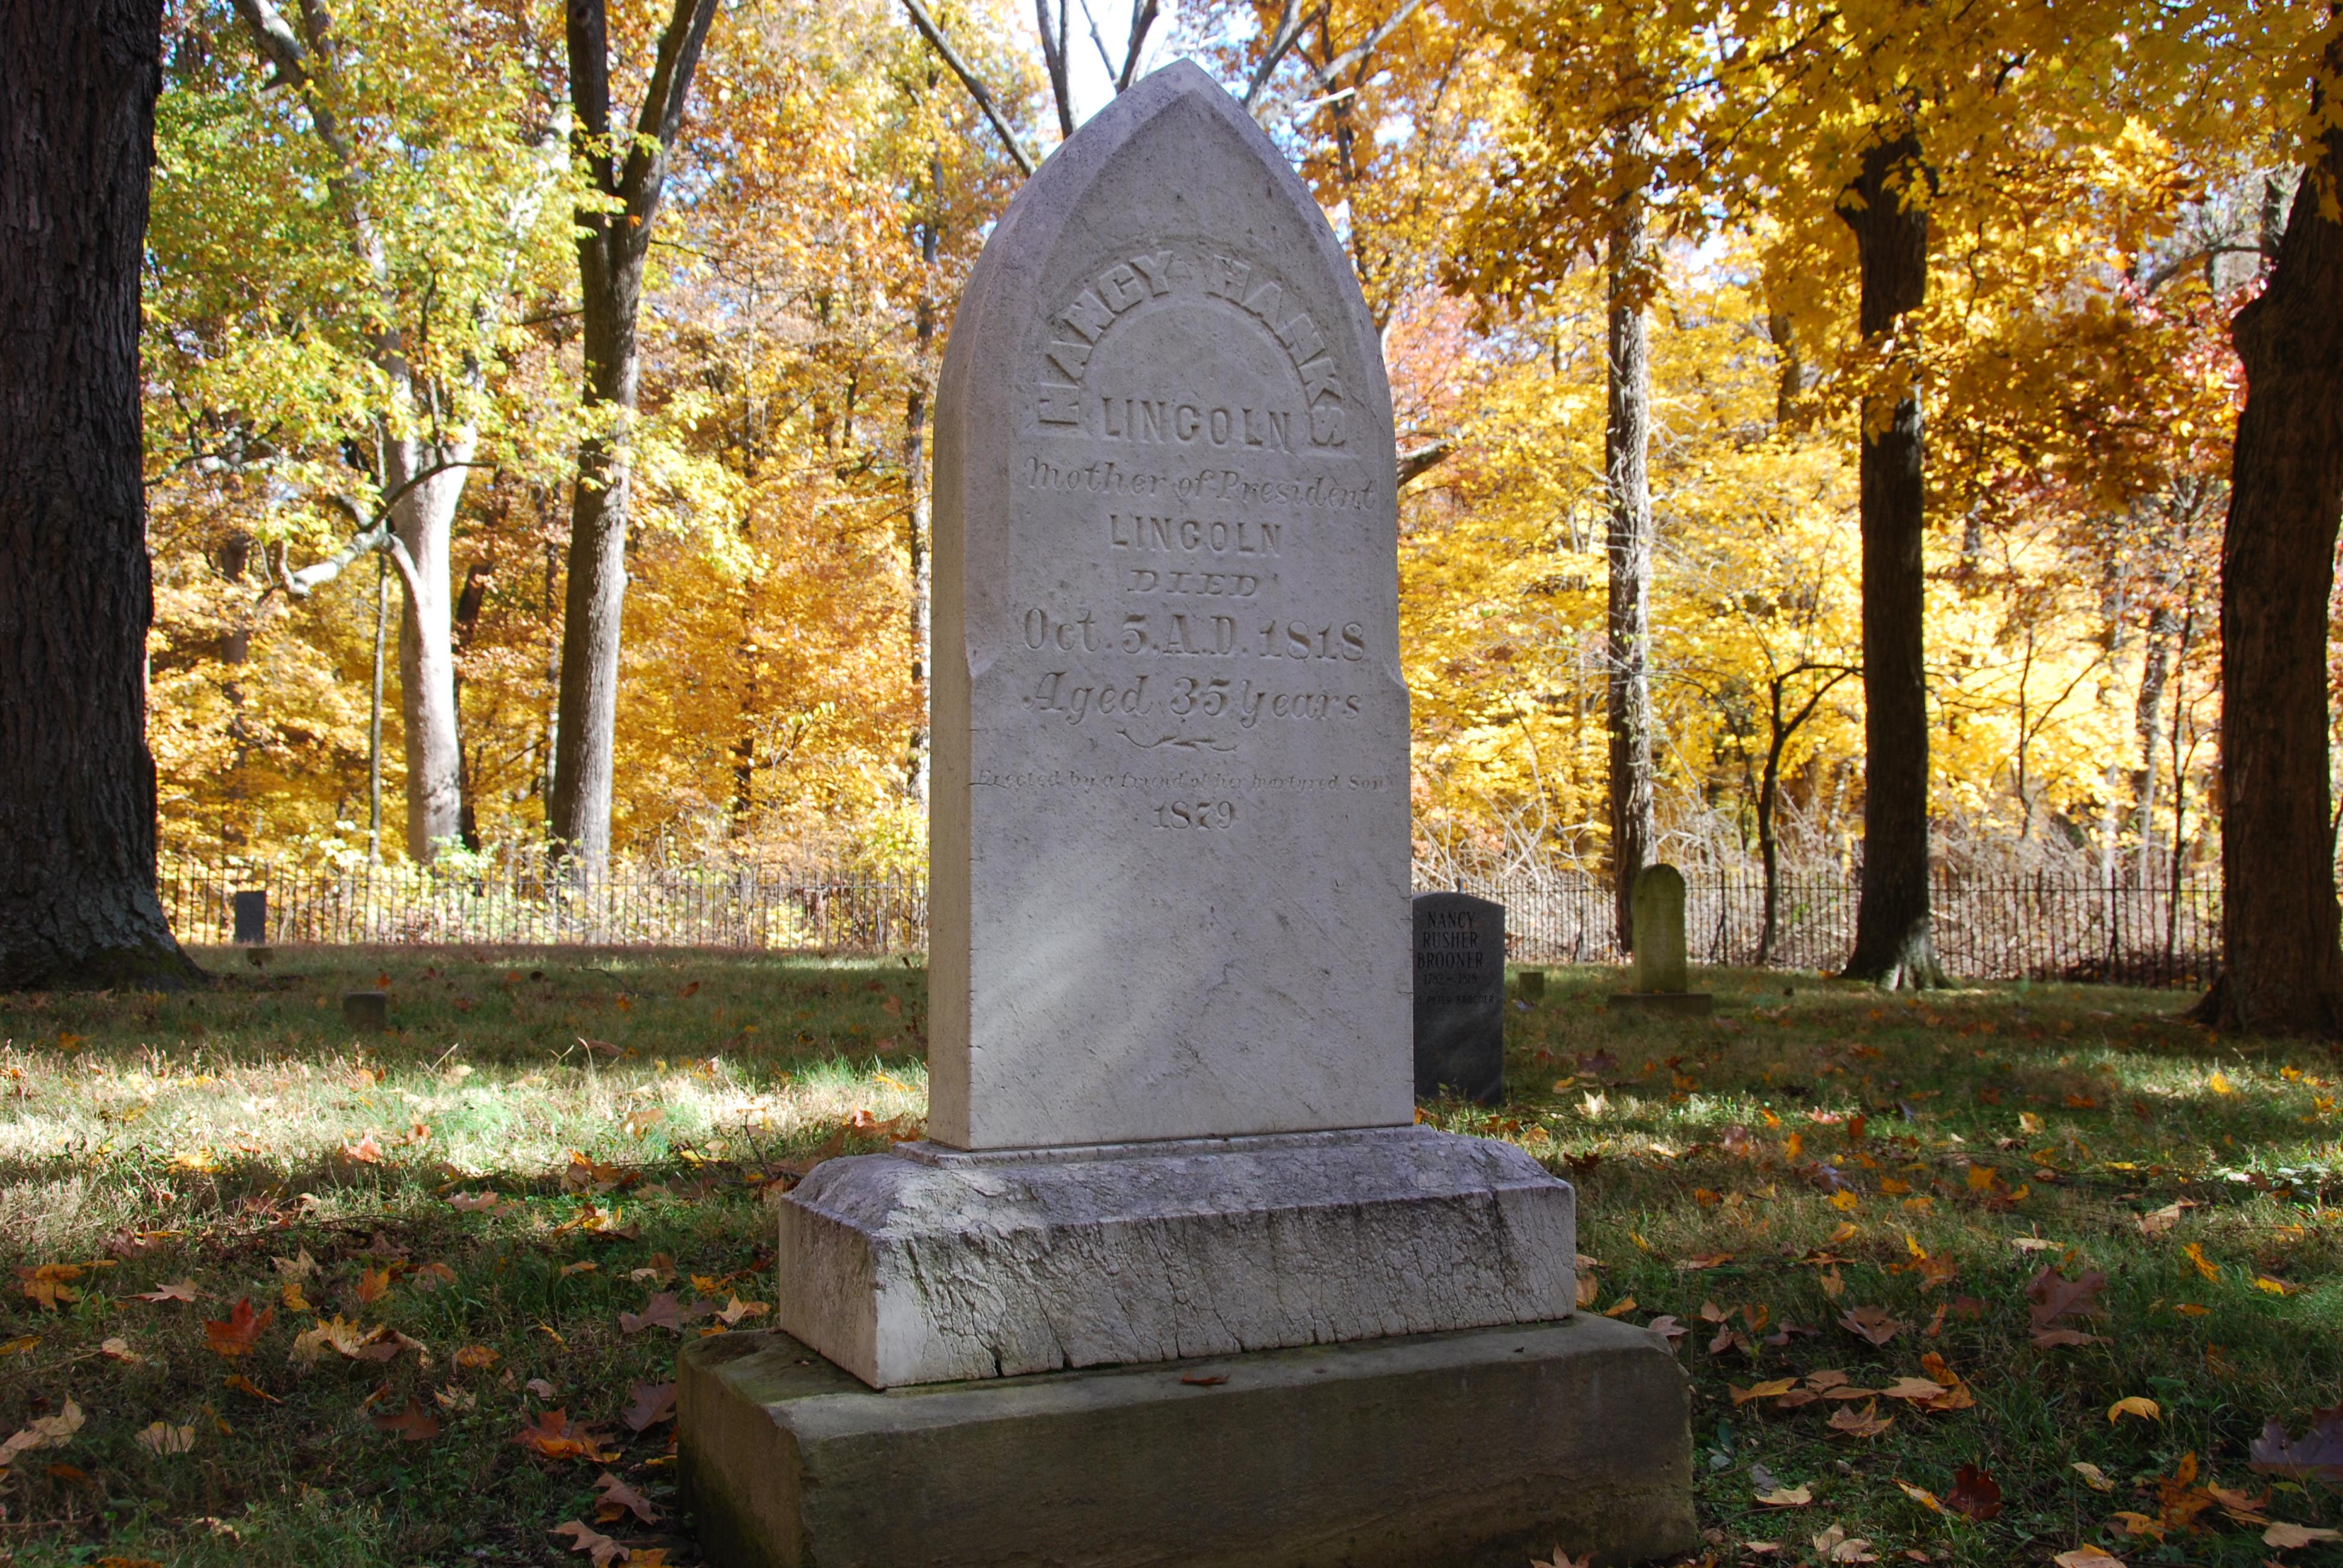 White marble headstone of Nancy Hanks Lincoln in cemetery surrounded by iron fence and trees.